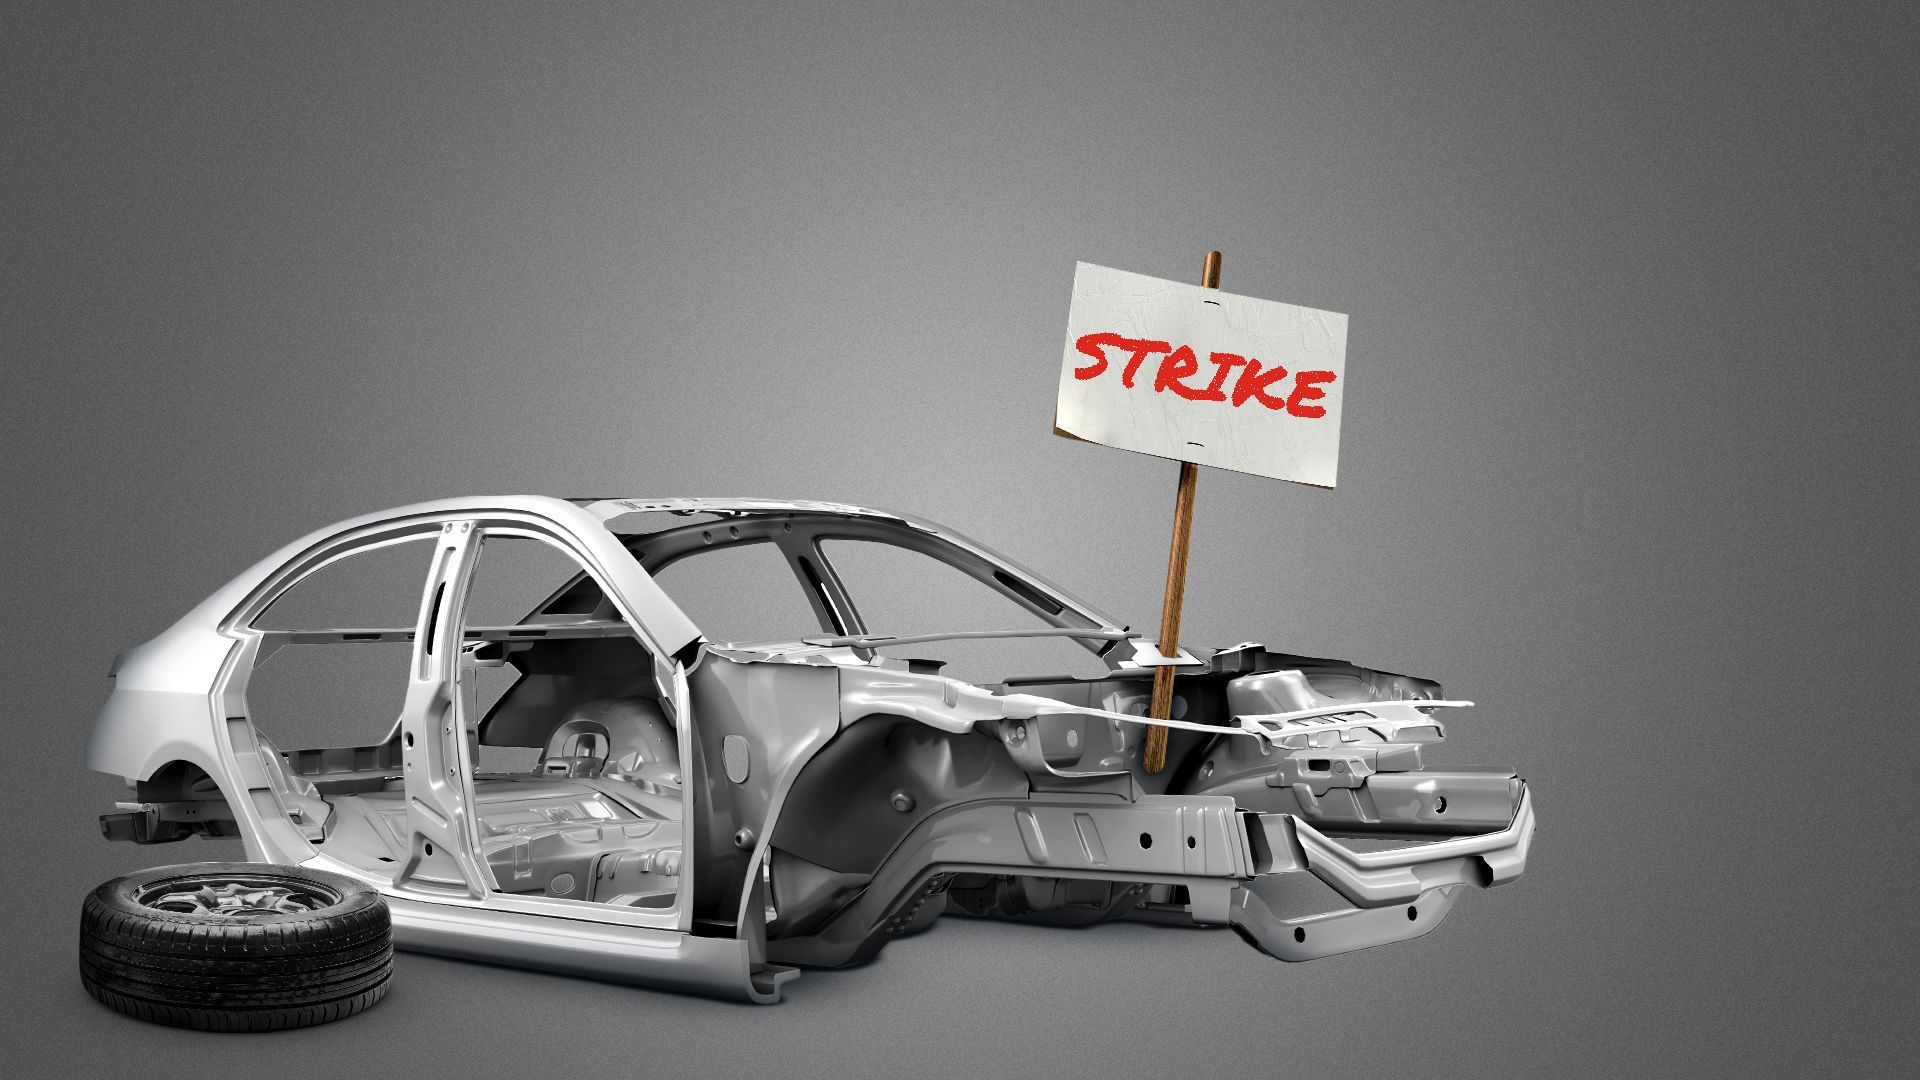 Illustration of a half finished car chassis with a sign stuck in the frame that reads "Strike". 